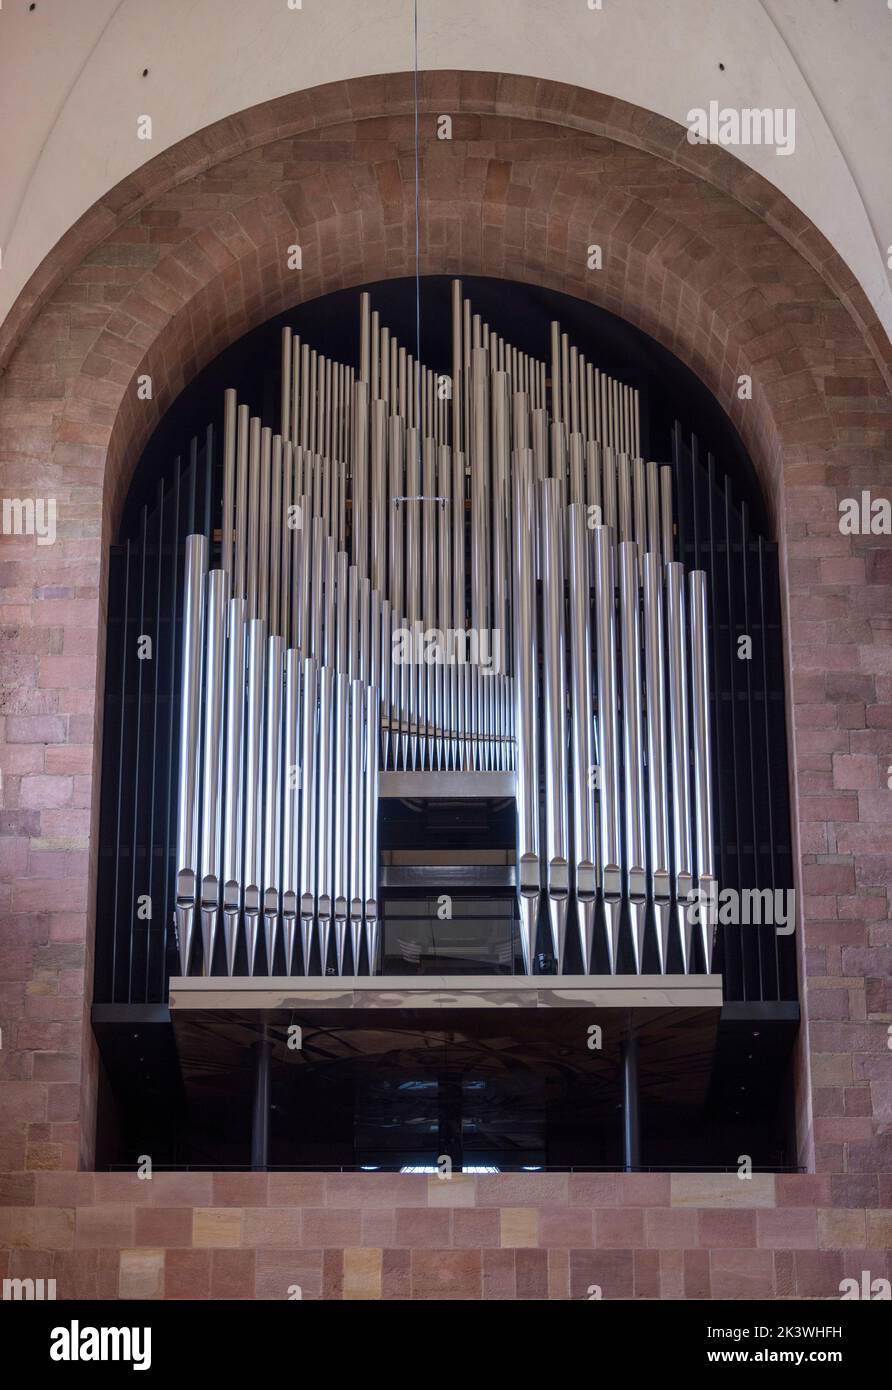 the main organ, Speyer Cathedral, Speyer, Germany Stock Photo